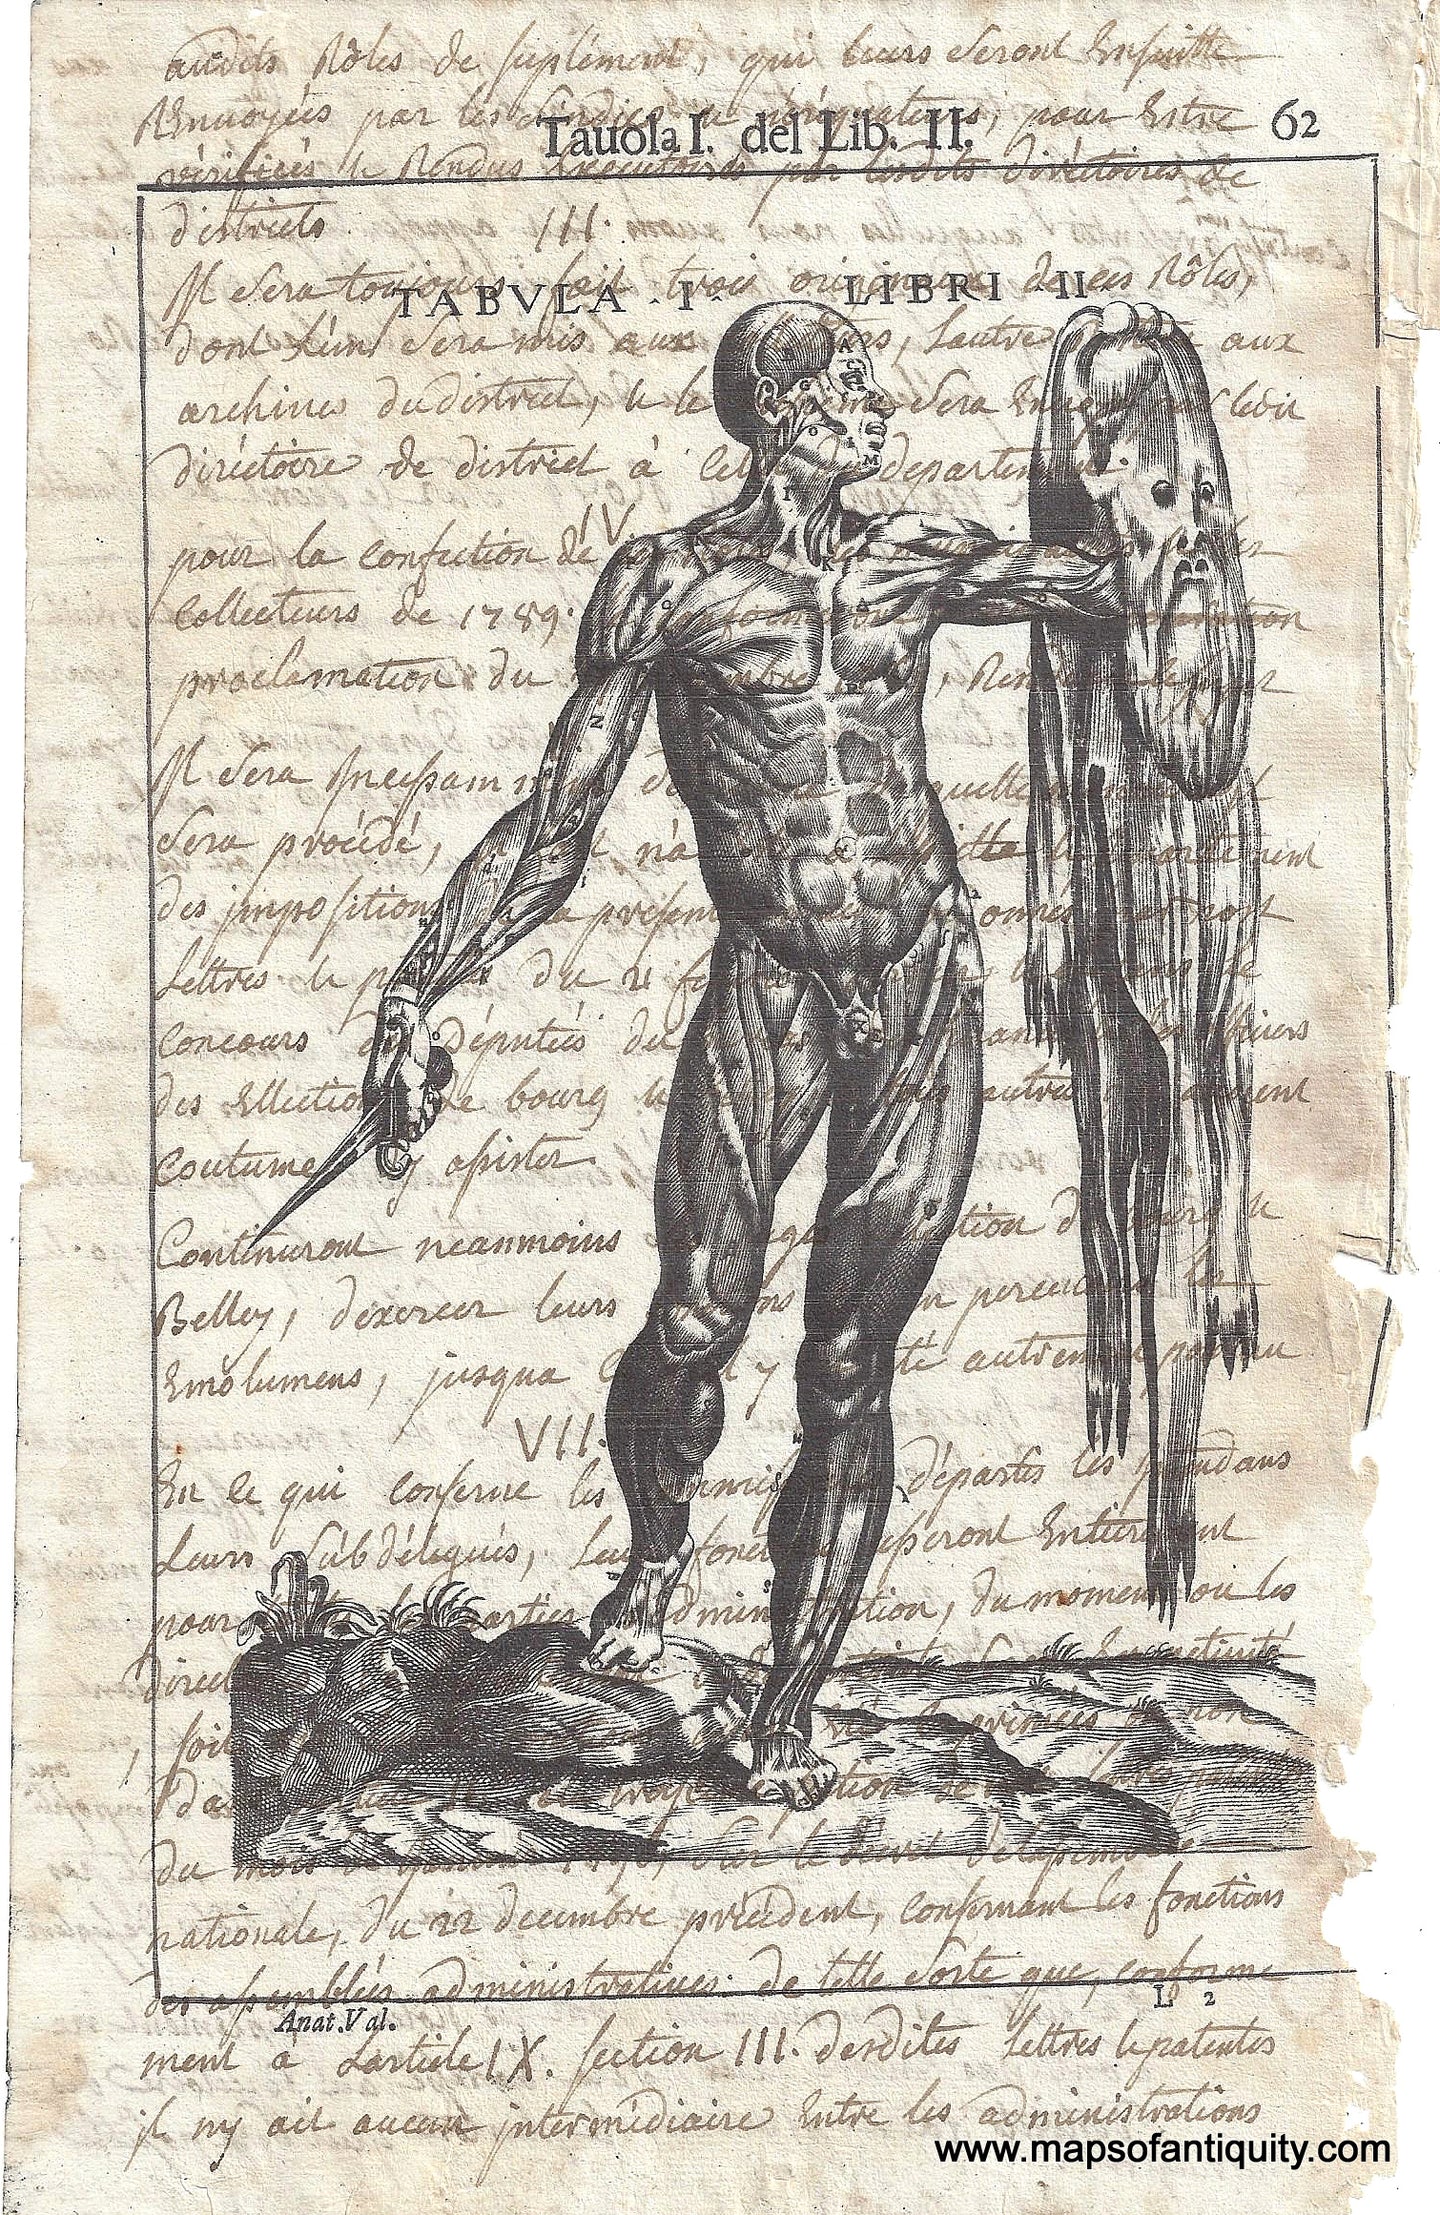 Digitally-Engraved-Specialty-Reproduction-Tauola-I.-del-Lib.-II-(Reproduction-on-Antique-Paper)-Digitally-Engraved-Specialty-Print-on-antique-paper-Reproduction-musculature-skin-human-body-science-creepy-Halloween-Tauola-I-del-Lib-II-Reproduction-on-Antique-Paper-Maps-Of-Antiquity